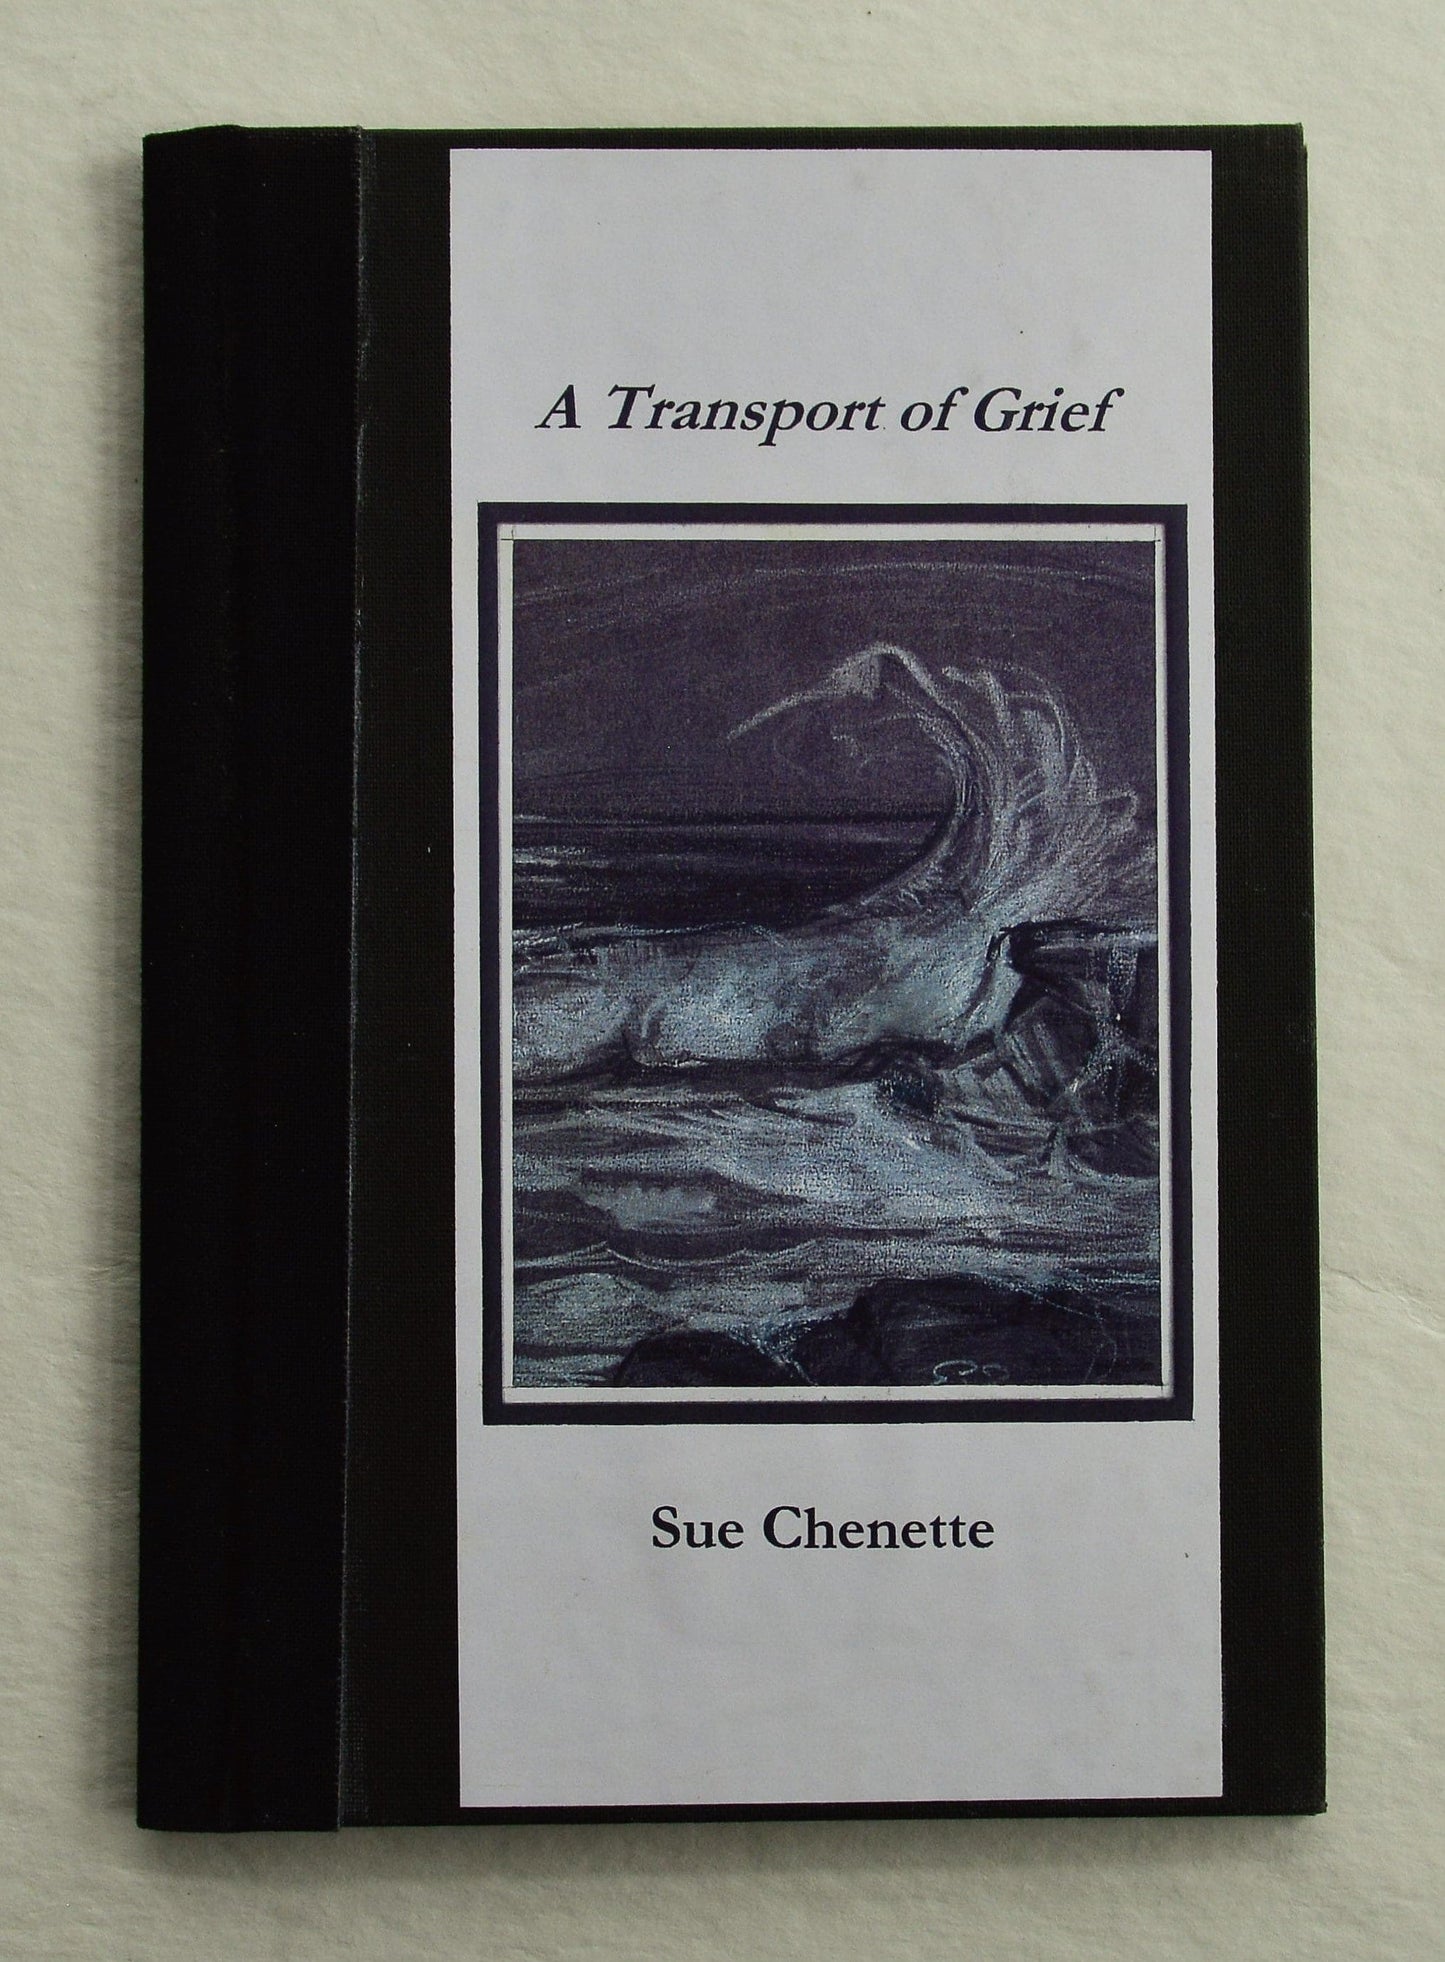 A Transport of Grief - Sue Chenette